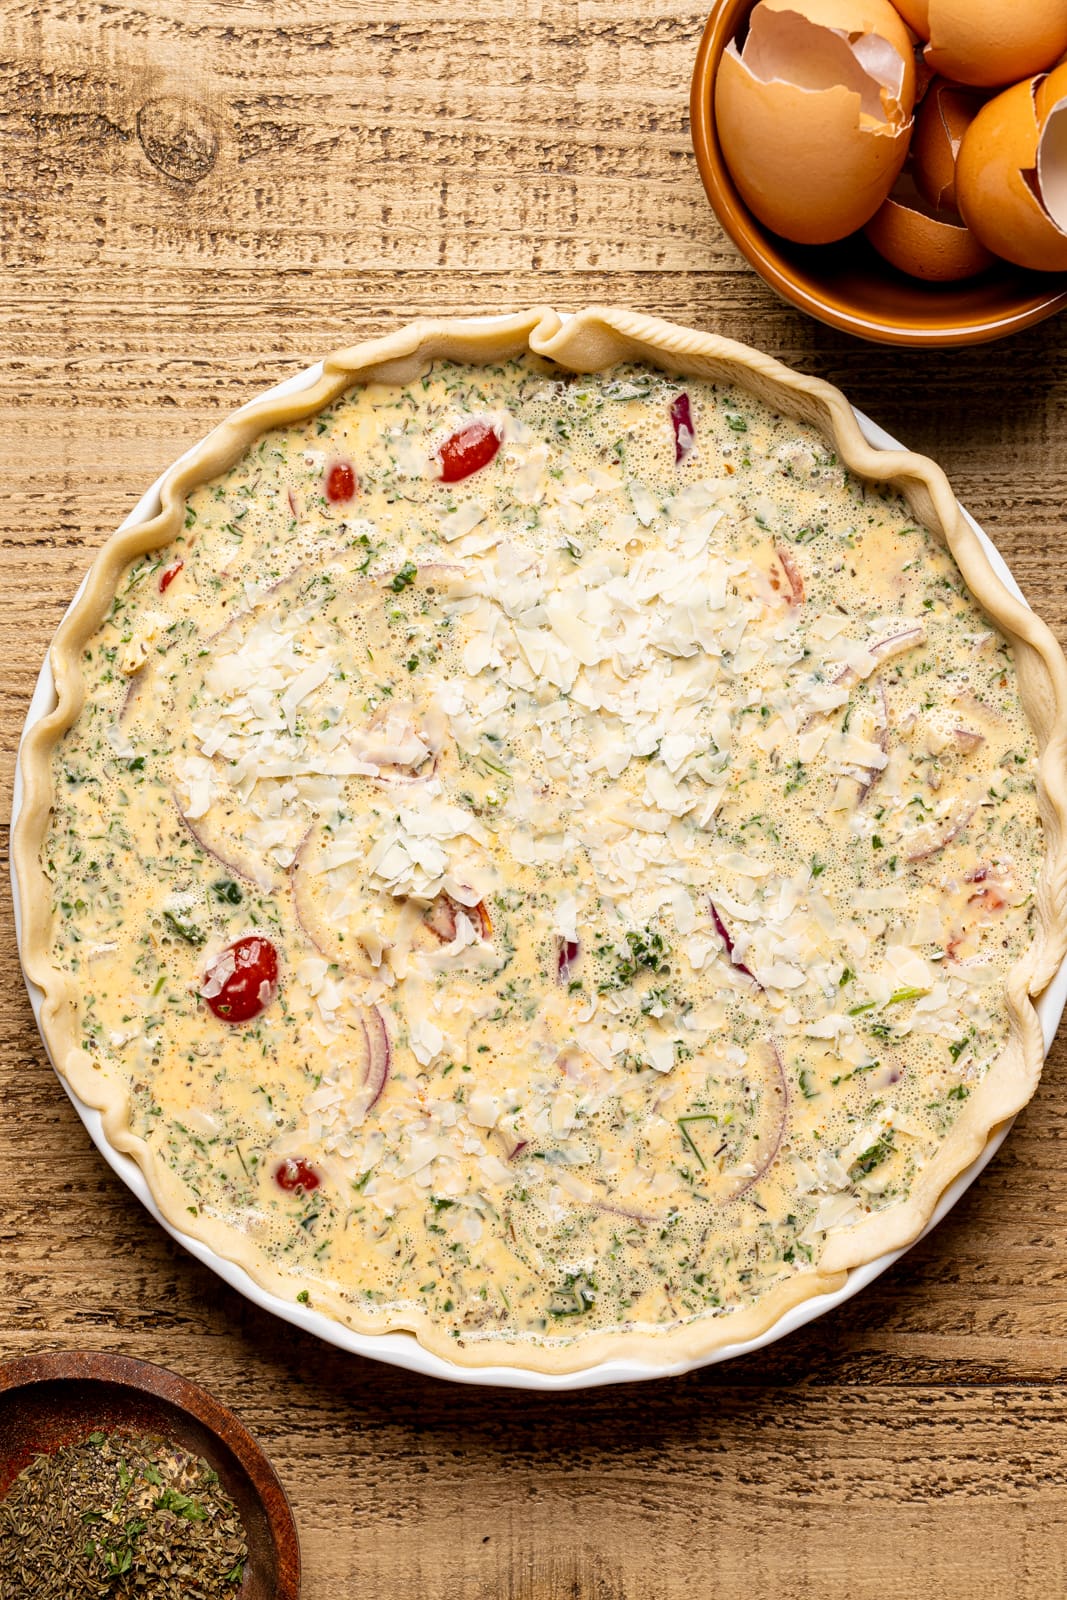 Quiche mixture poured unto crust in a baking dish on a brown wood table with herbs + seasonings.